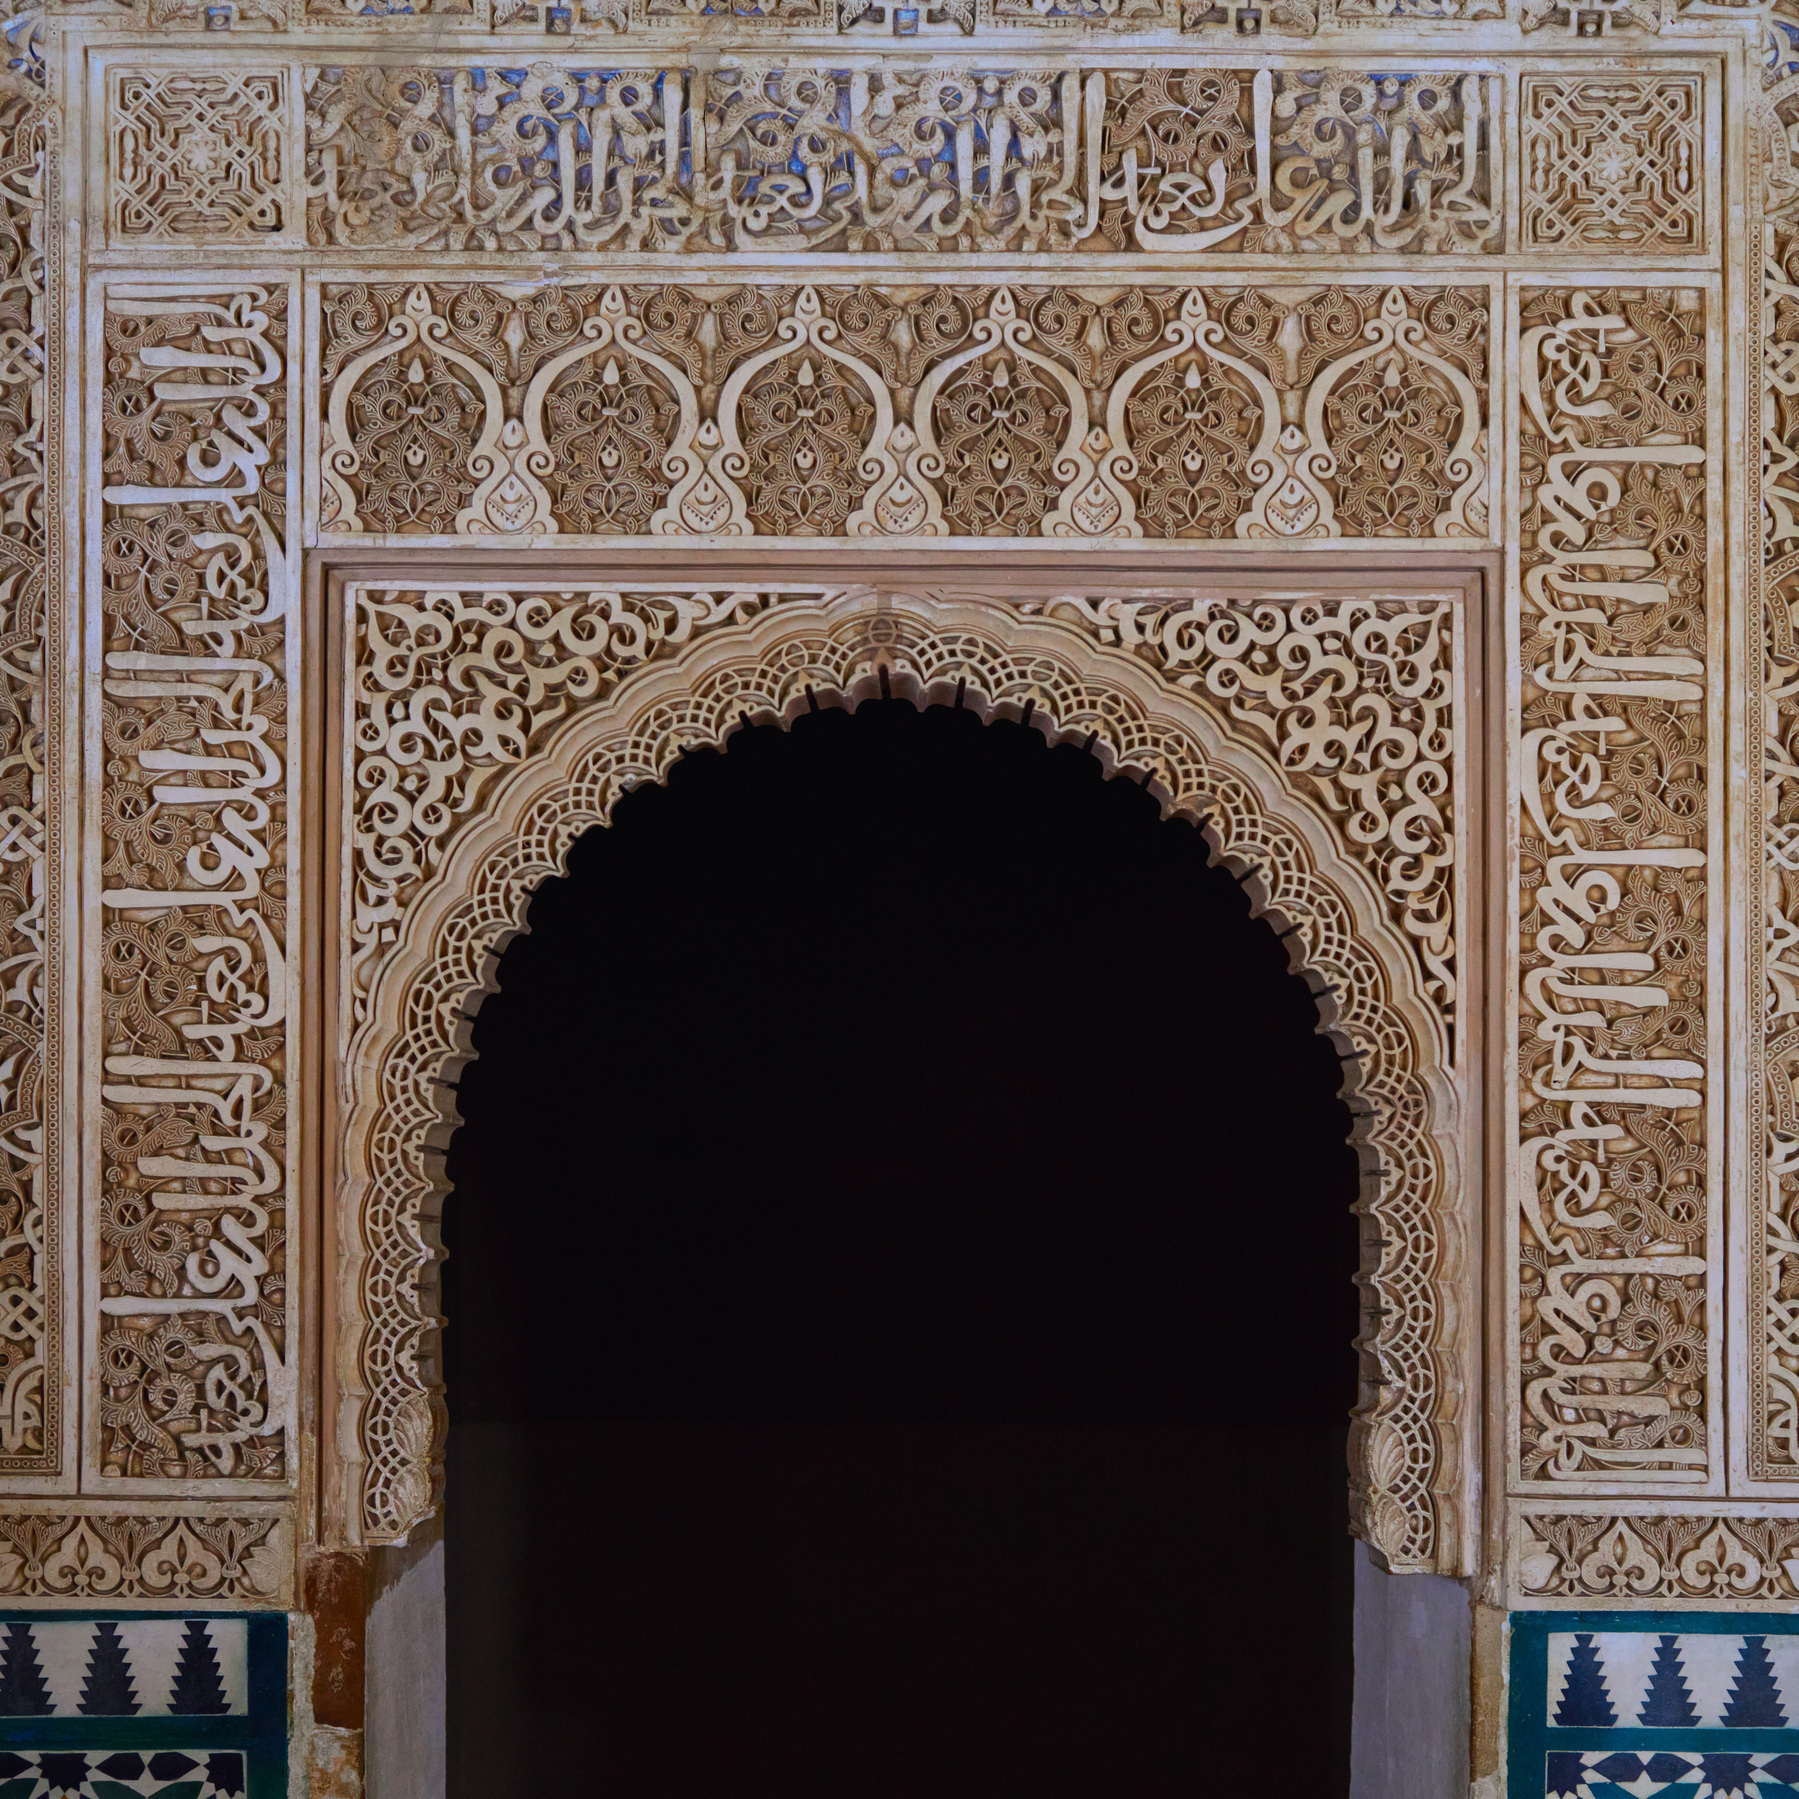 An intricate archway from inside the nasrid palace. The archway is pure darkness, but the surround is filled with intricate hand carved patterns in the stone. There are remnants of a deep blue paint that previously filled the engravings.